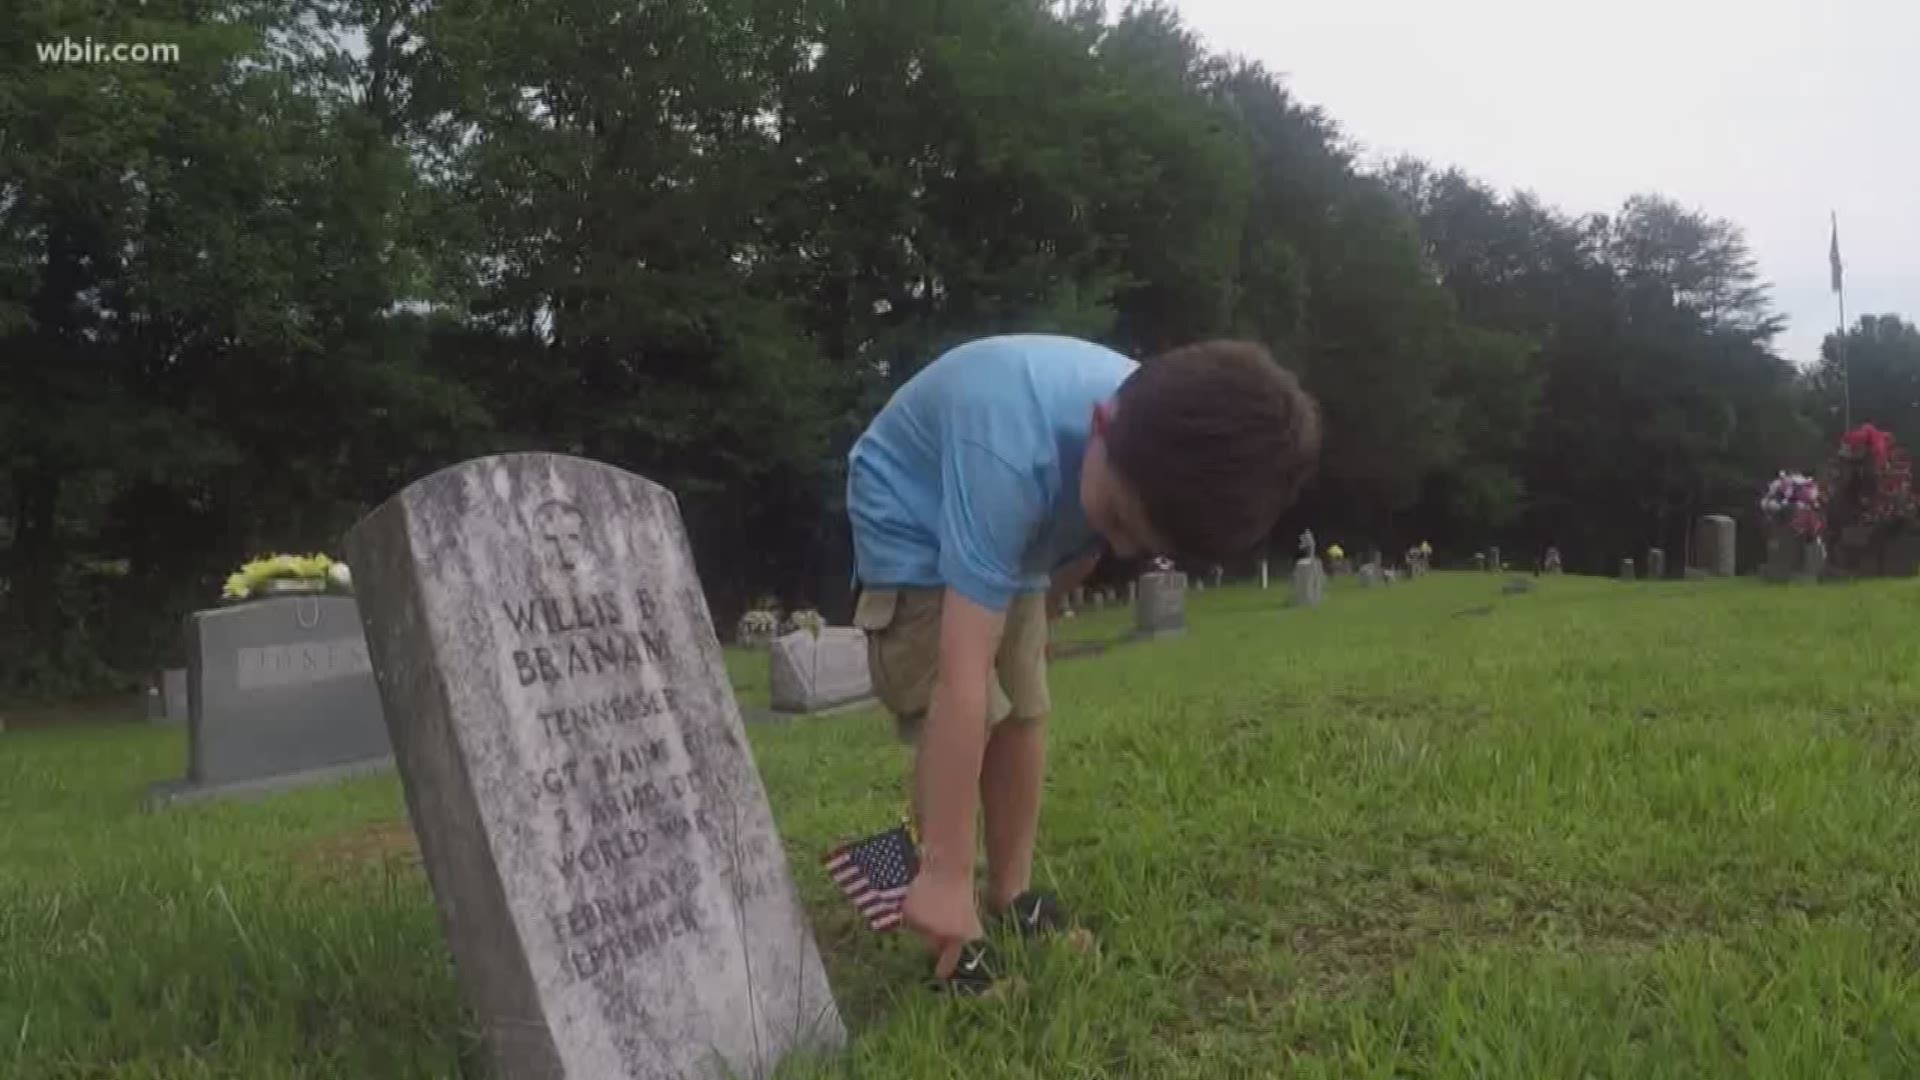 Parker Swafford showed the ultimate sign of respect on Memorial Day at a cemetery in Jellico, Tennessee.